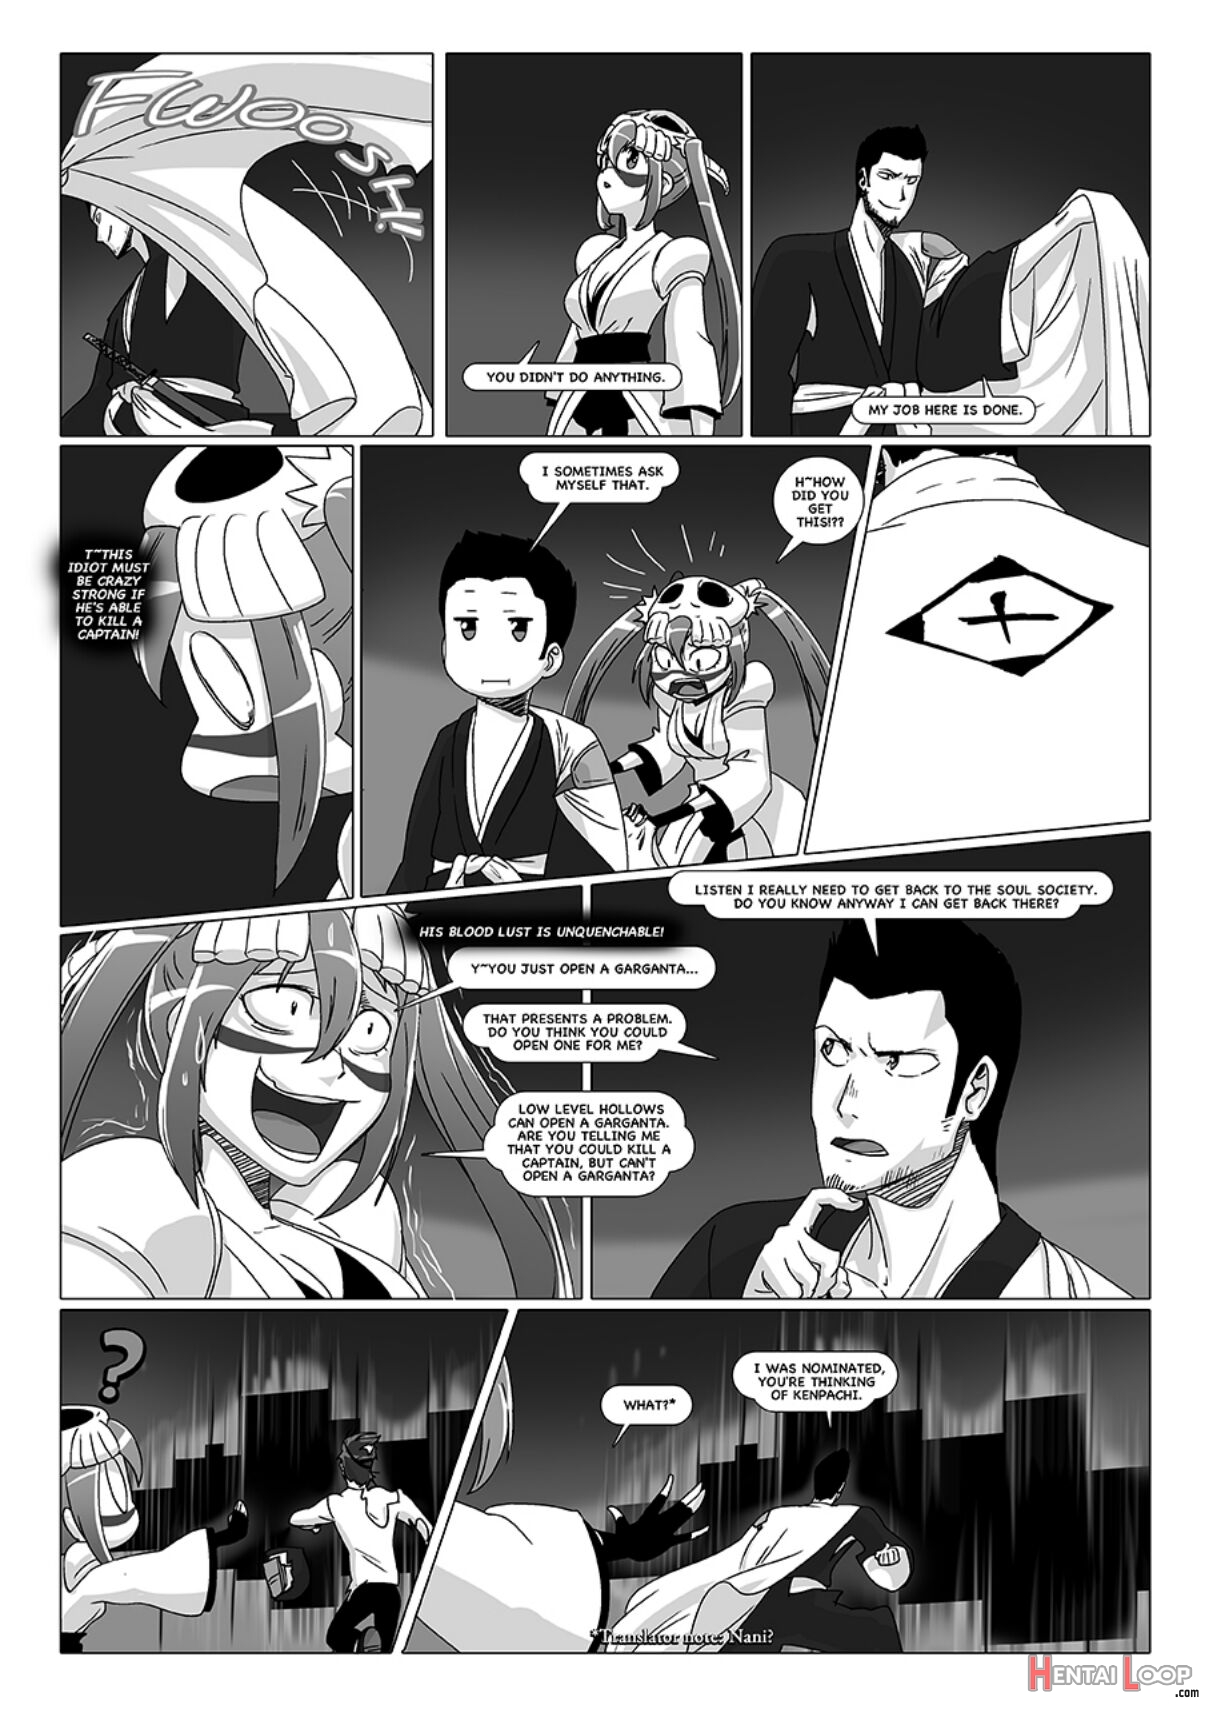 Happy To Serve You - Xxx Version page 448